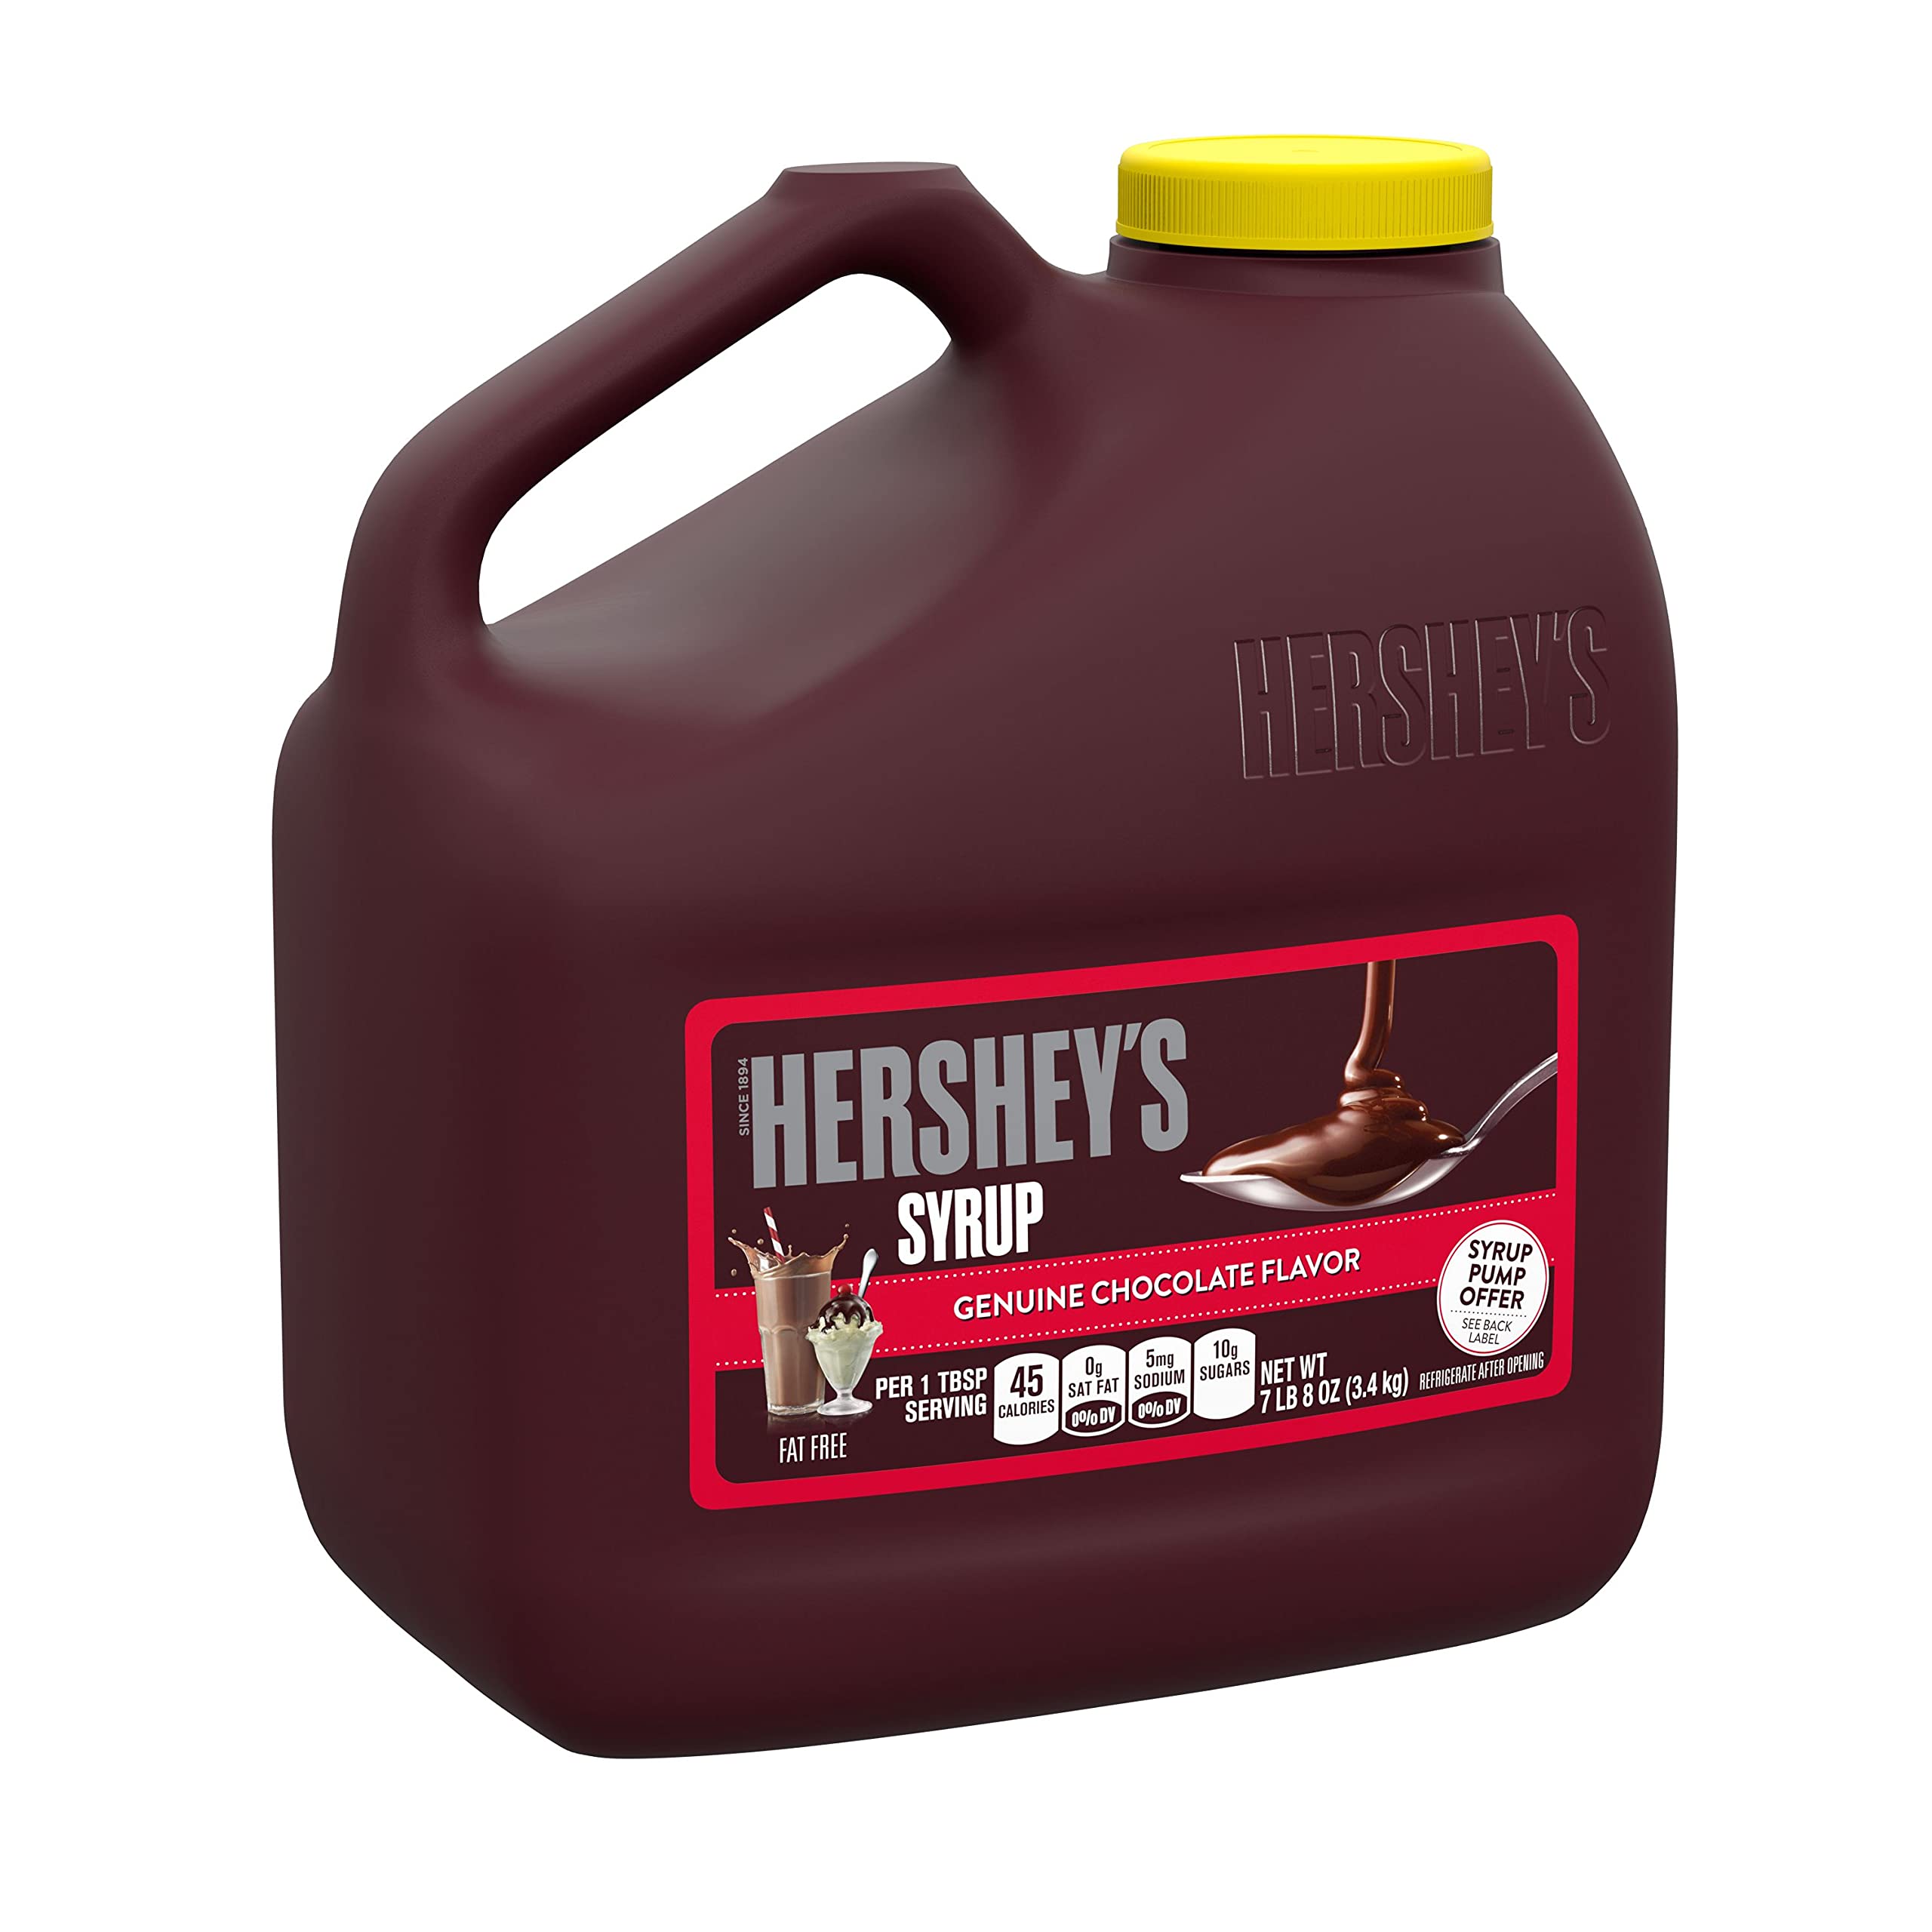 7.5 lbs HERSHEY'S Chocolate Syrup: $8.51 or lower at Amazon